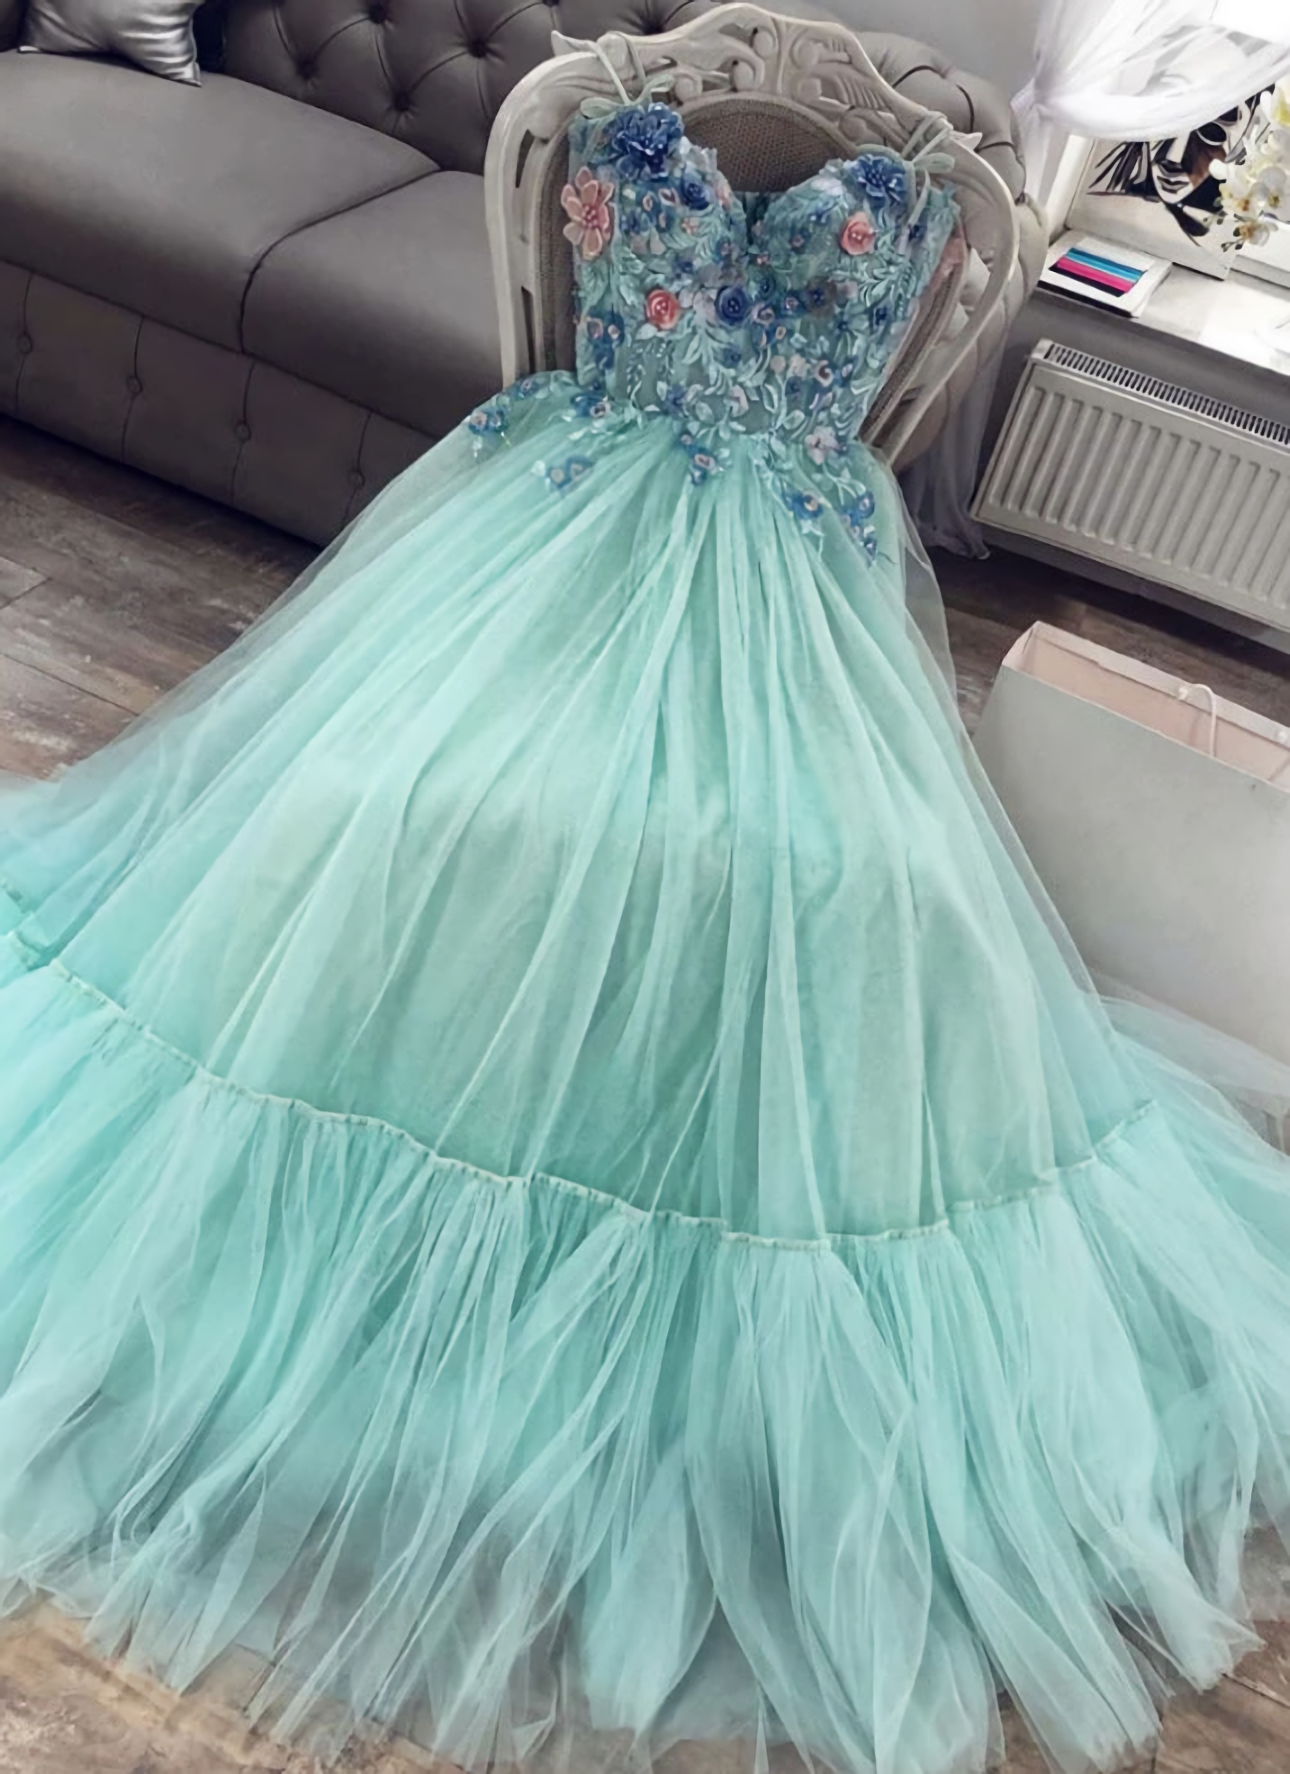 Homecoming Dresses Idea, Green Sweetheart Tulle Lace Long Prom Dress, Green Evening Dress